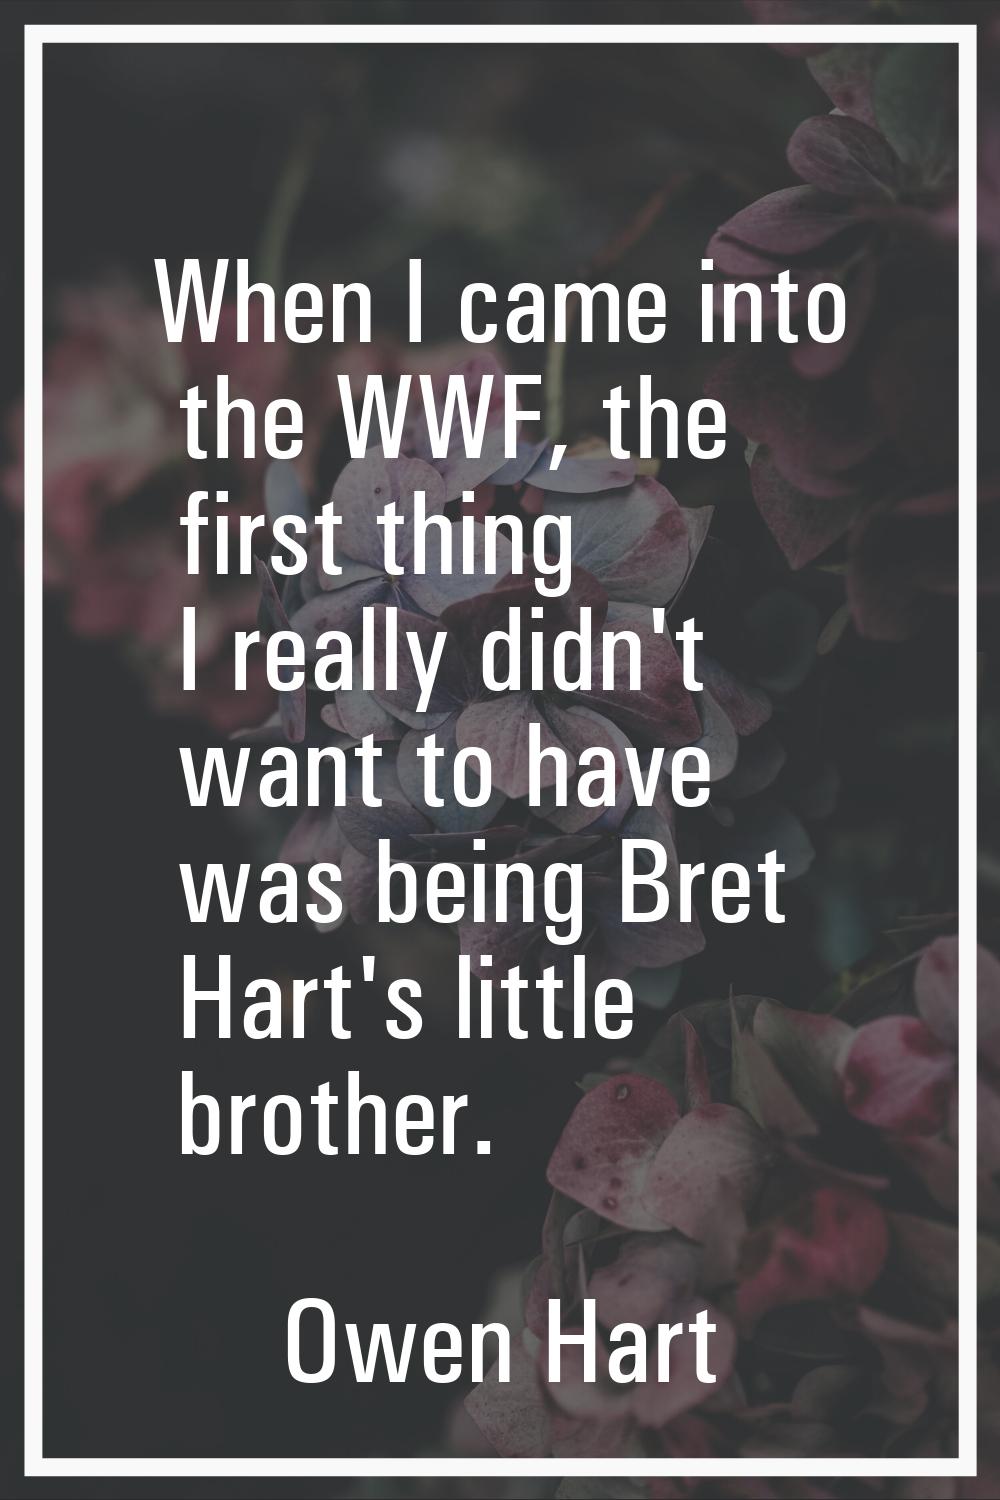 When I came into the WWF, the first thing I really didn't want to have was being Bret Hart's little